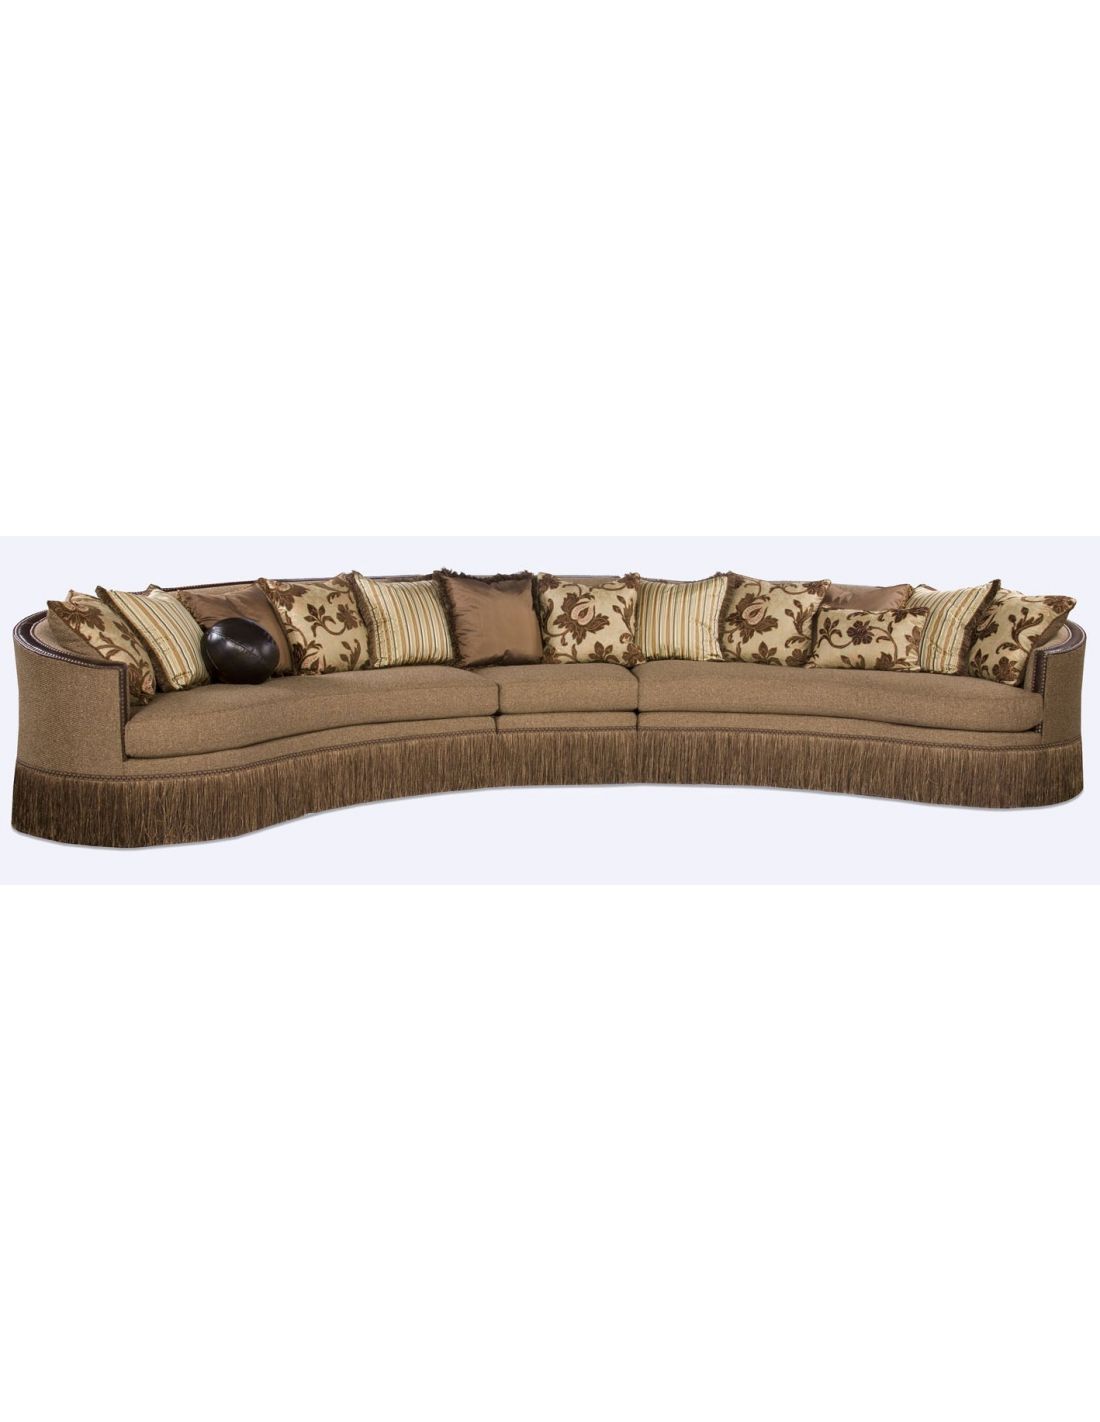 Extra Long Sectional Sofa, Extra Long Leather Sectional Couch